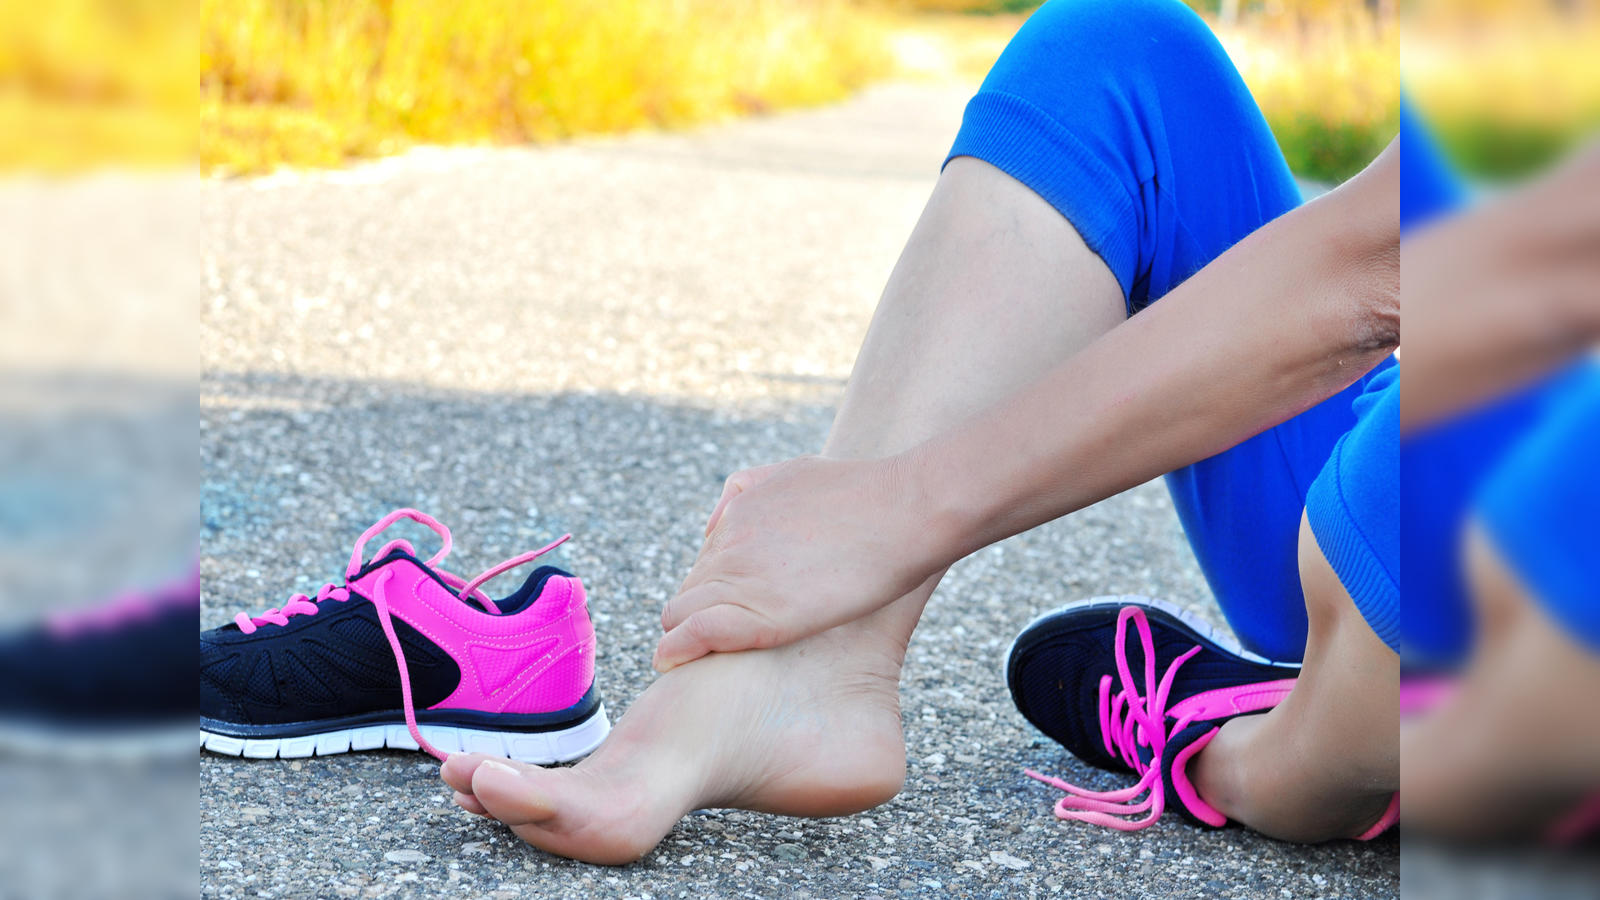 Assess Your Injury Risk For Running (Part 2) - Measuring Lower Leg Lengths  and Flexibility